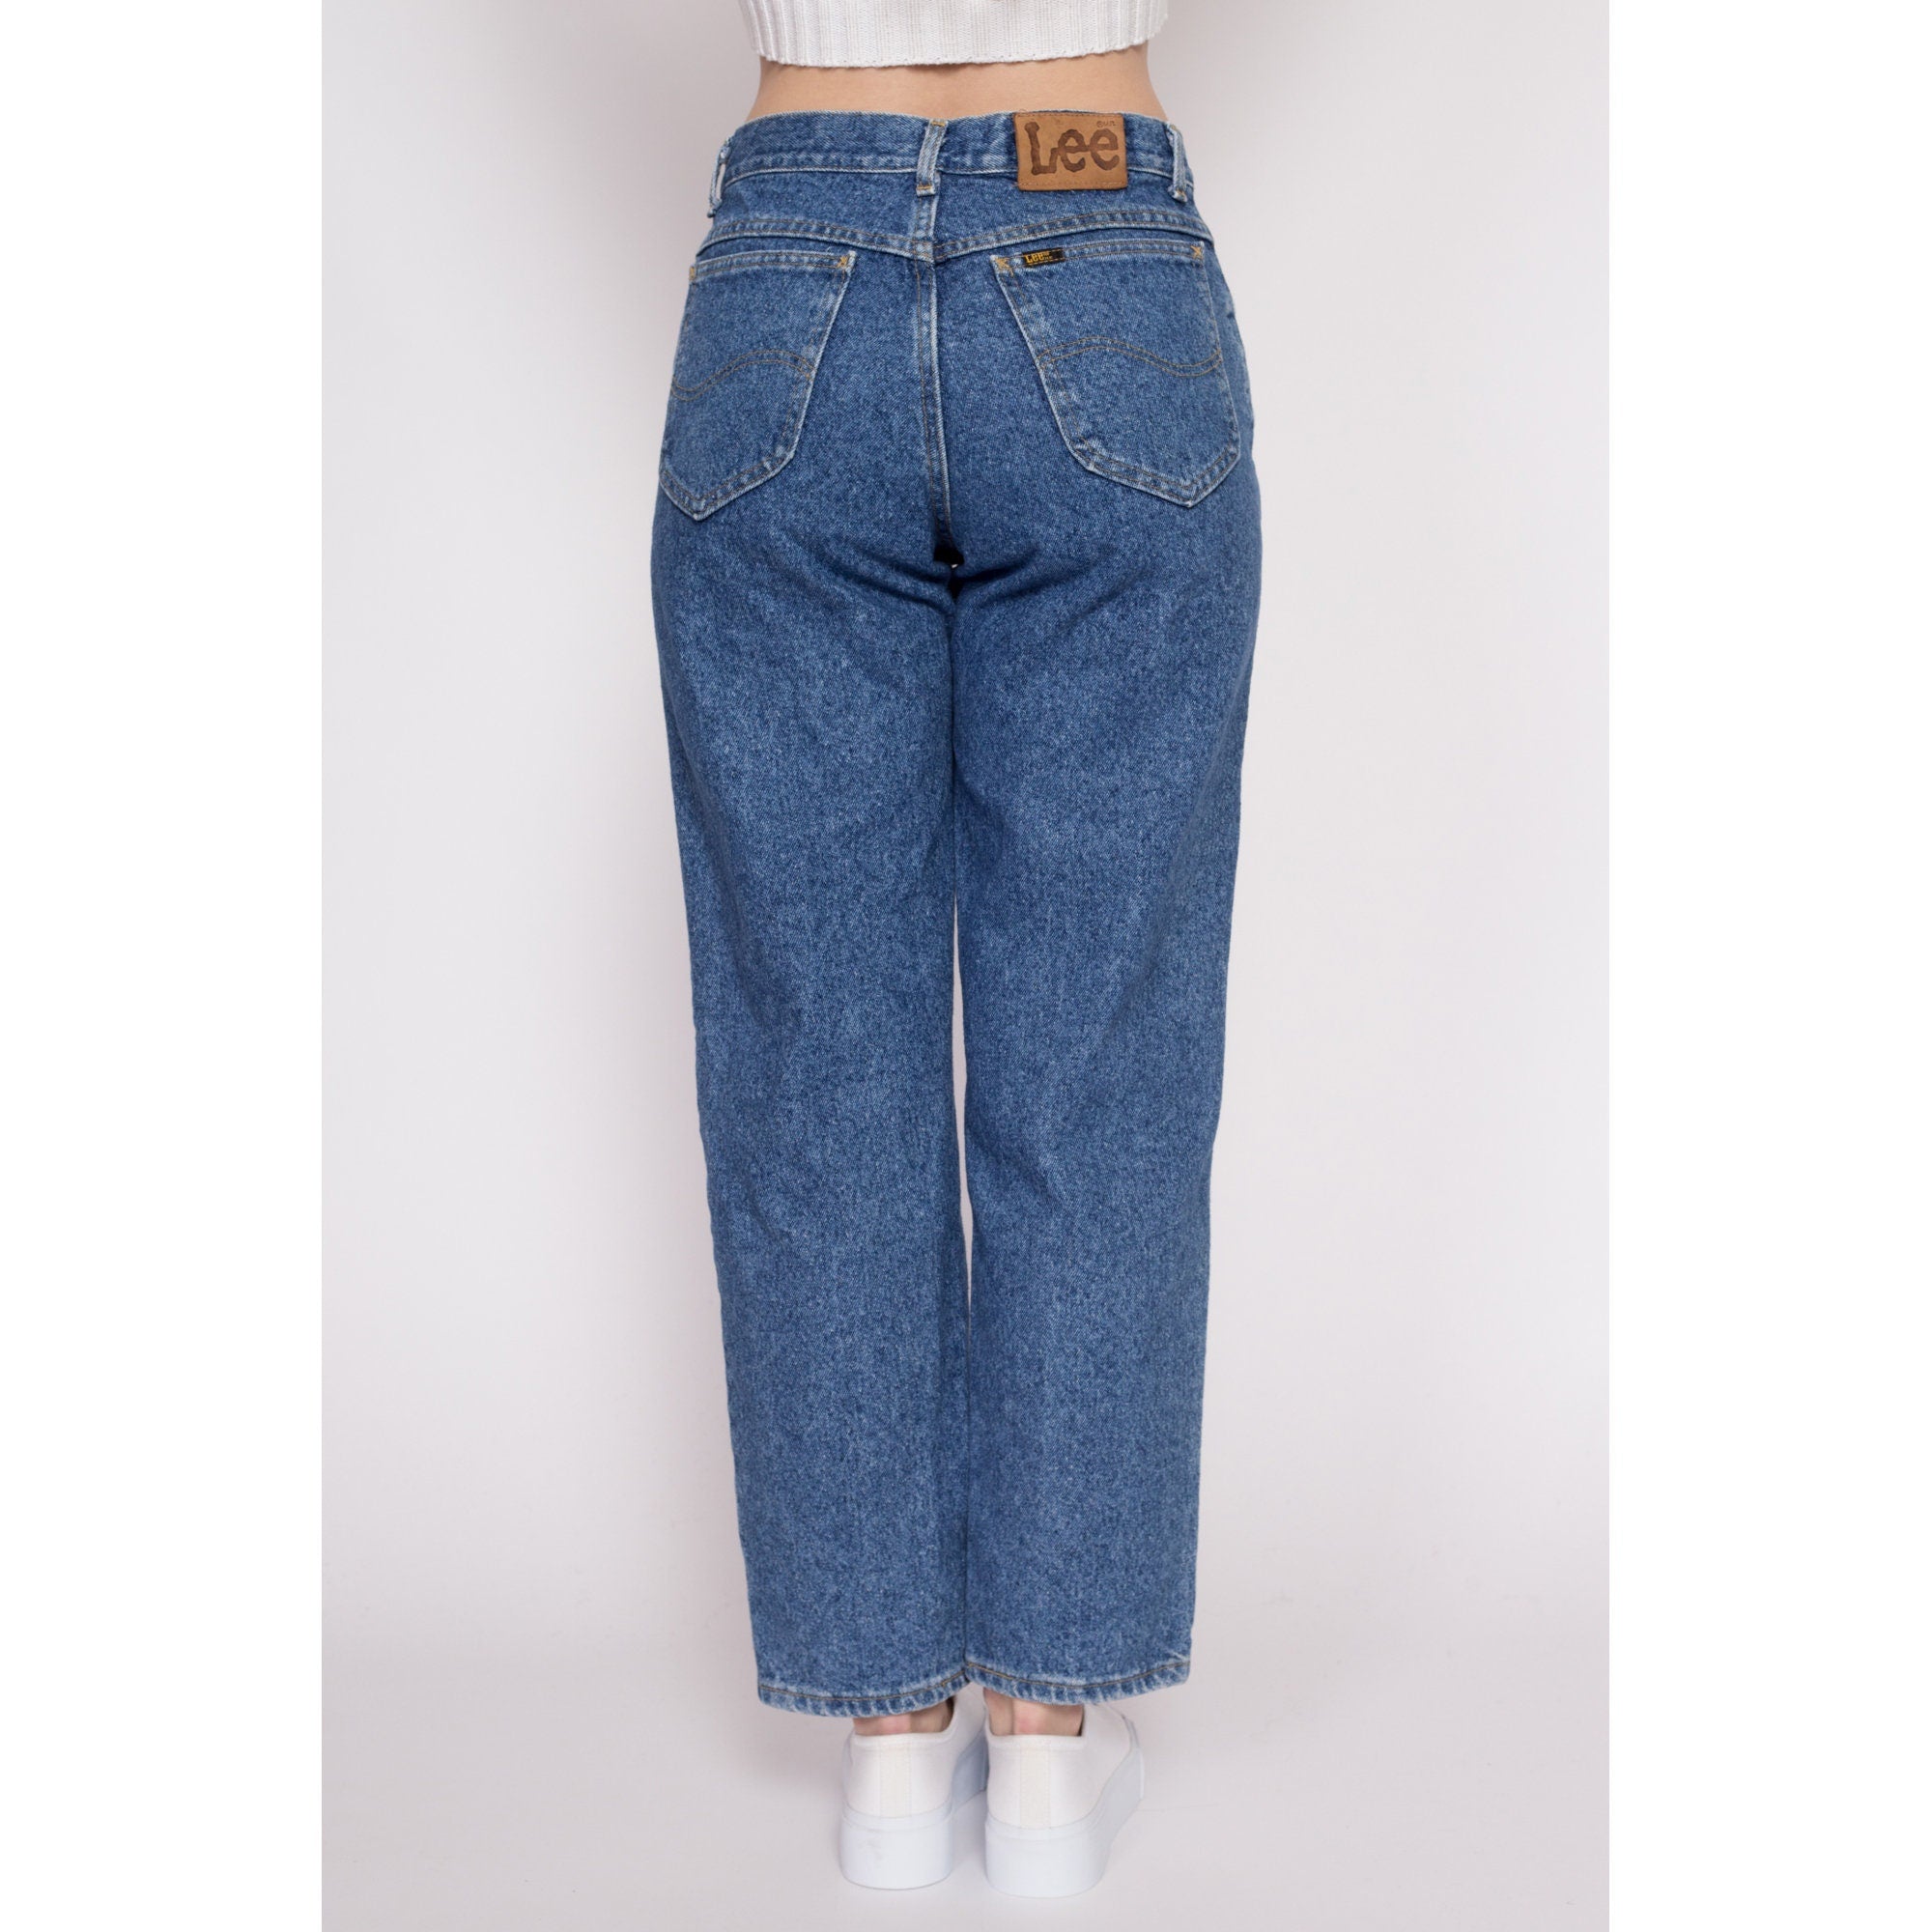 vintage Lee Riders 101Z 1950 Selvedge Jeans NEW With Tag Museum Grade 28x30  | eBay